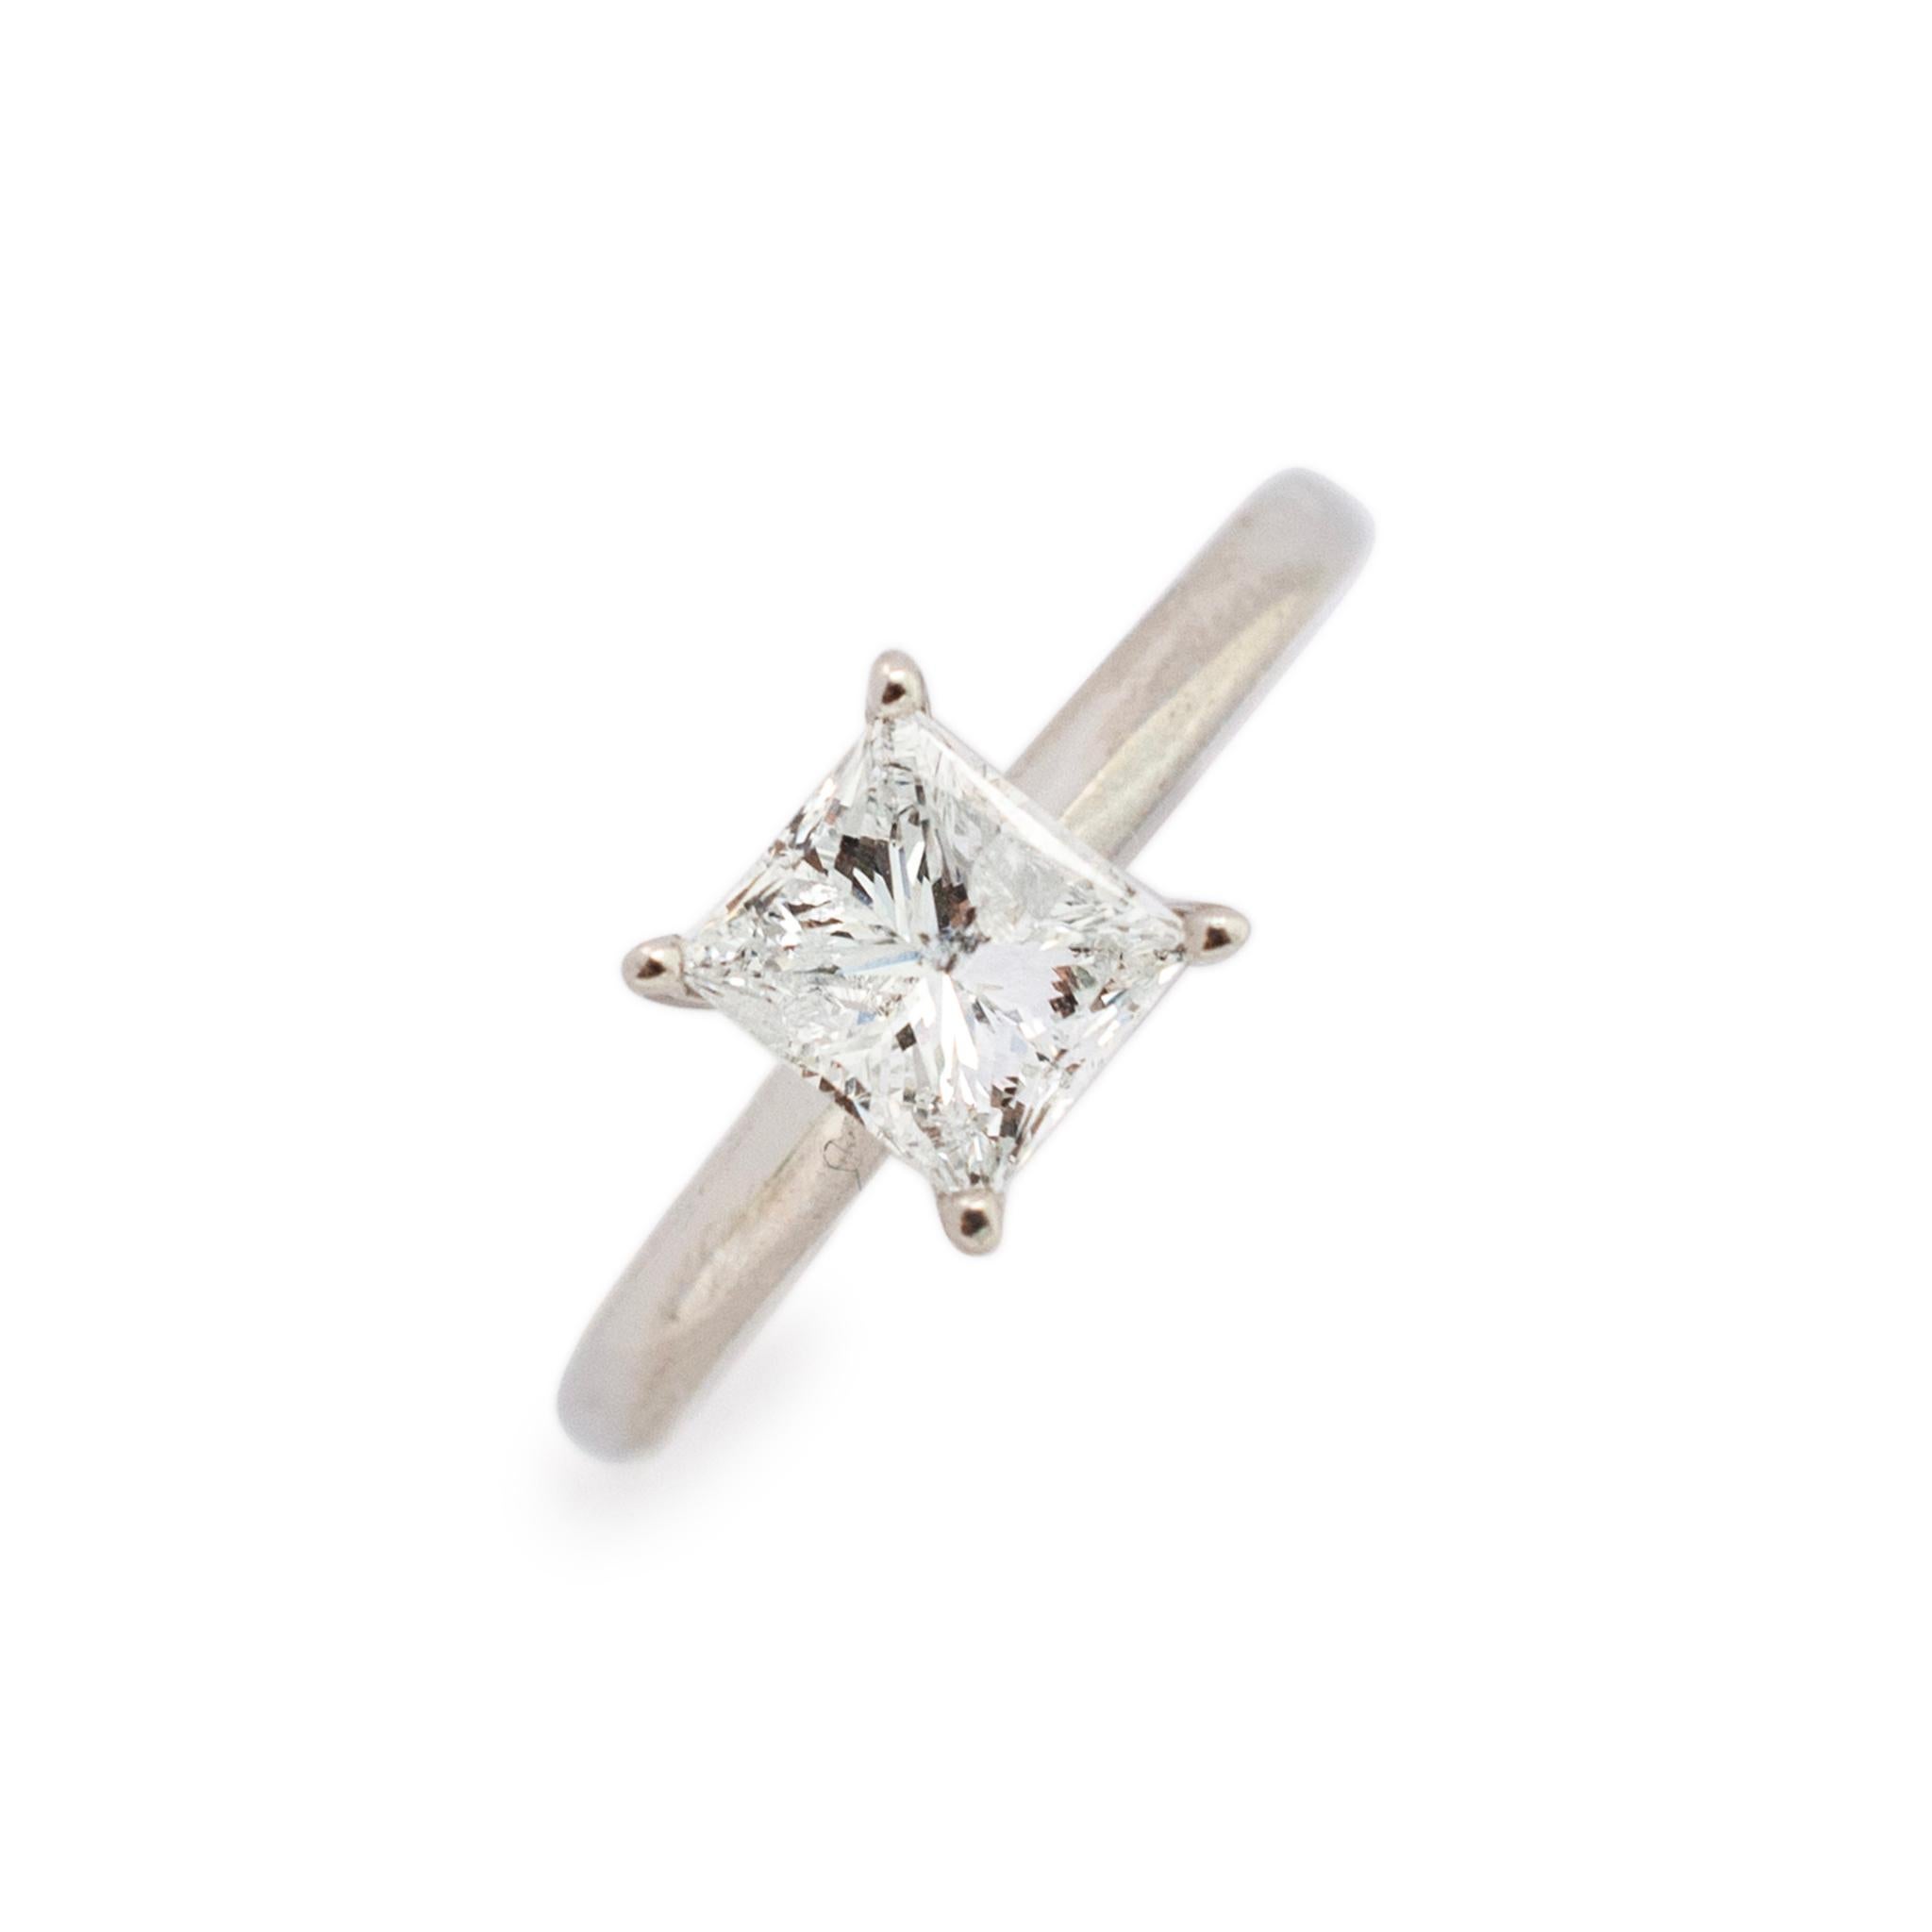 Gender: Ladies

Metal Type: 10K White Gold

Size: 6.5

Shank Maximum Width: 2.05 mm

Weight: 2.30 grams

Pre-owned in excellent condition. Might shows minor signs of wear.

Ladies 10K white gold diamond solitaire engagement ring with a half round